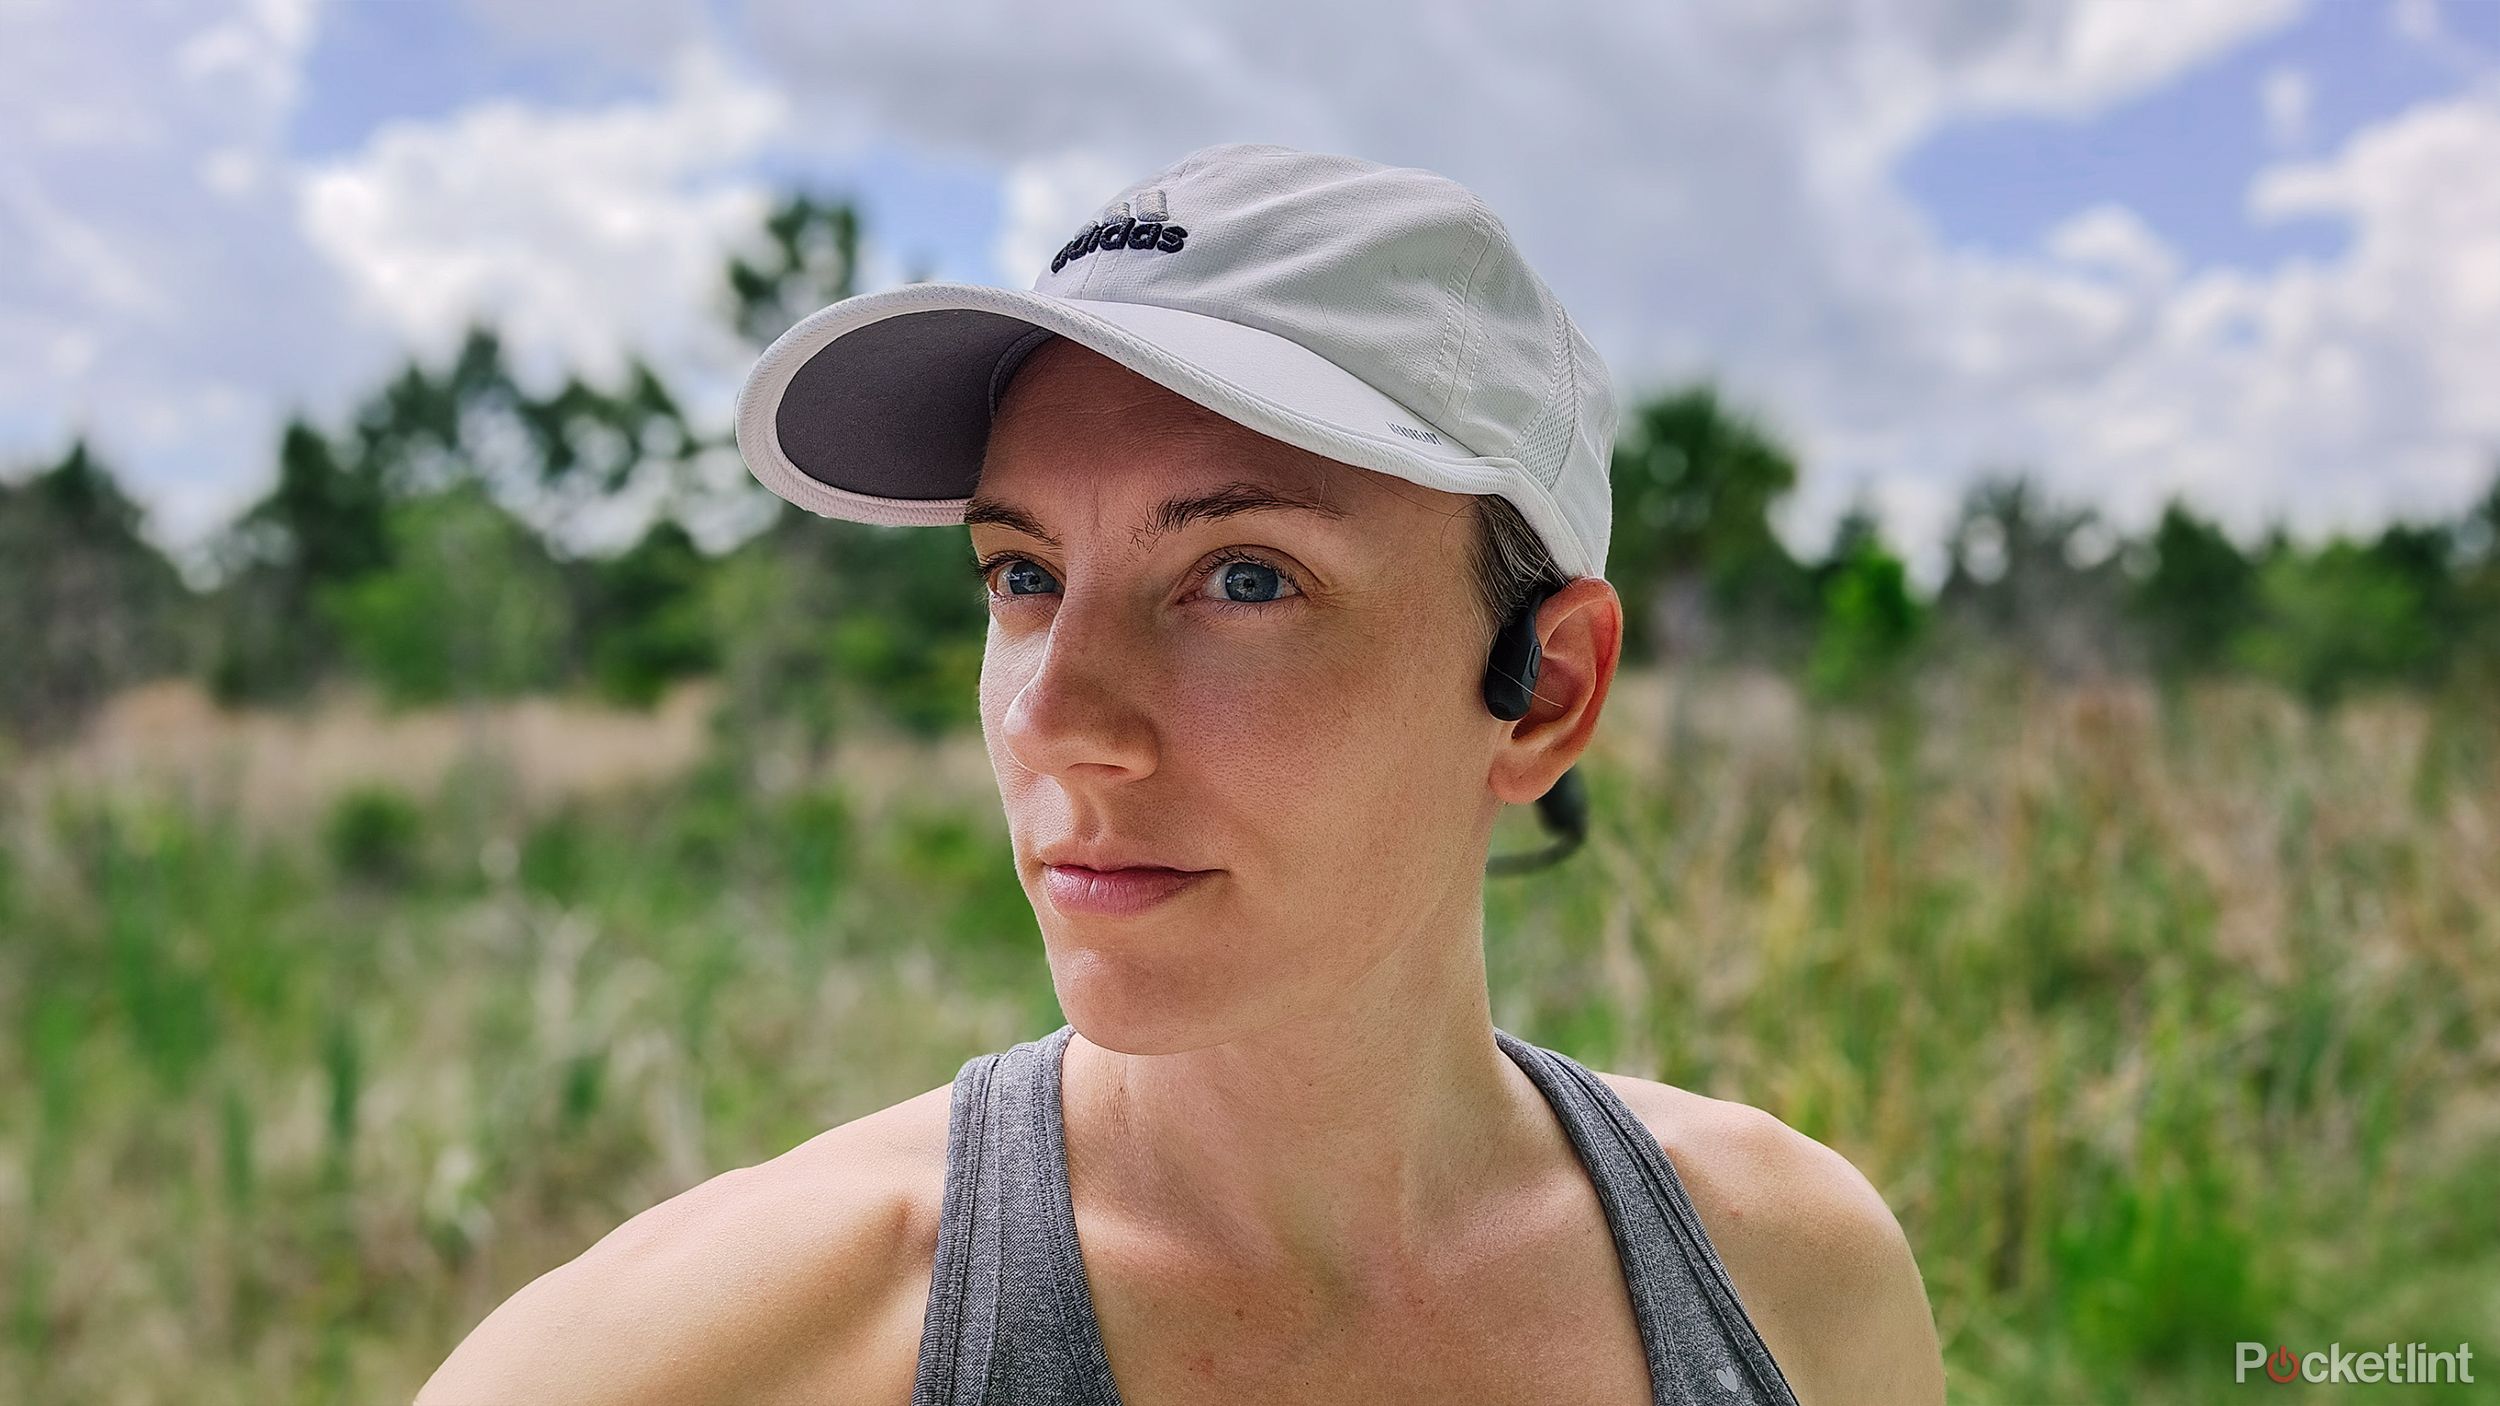 A woman with a white running hat in front of a blurred out forest wearing Shokz Open Run Pro bone conduction headphones.